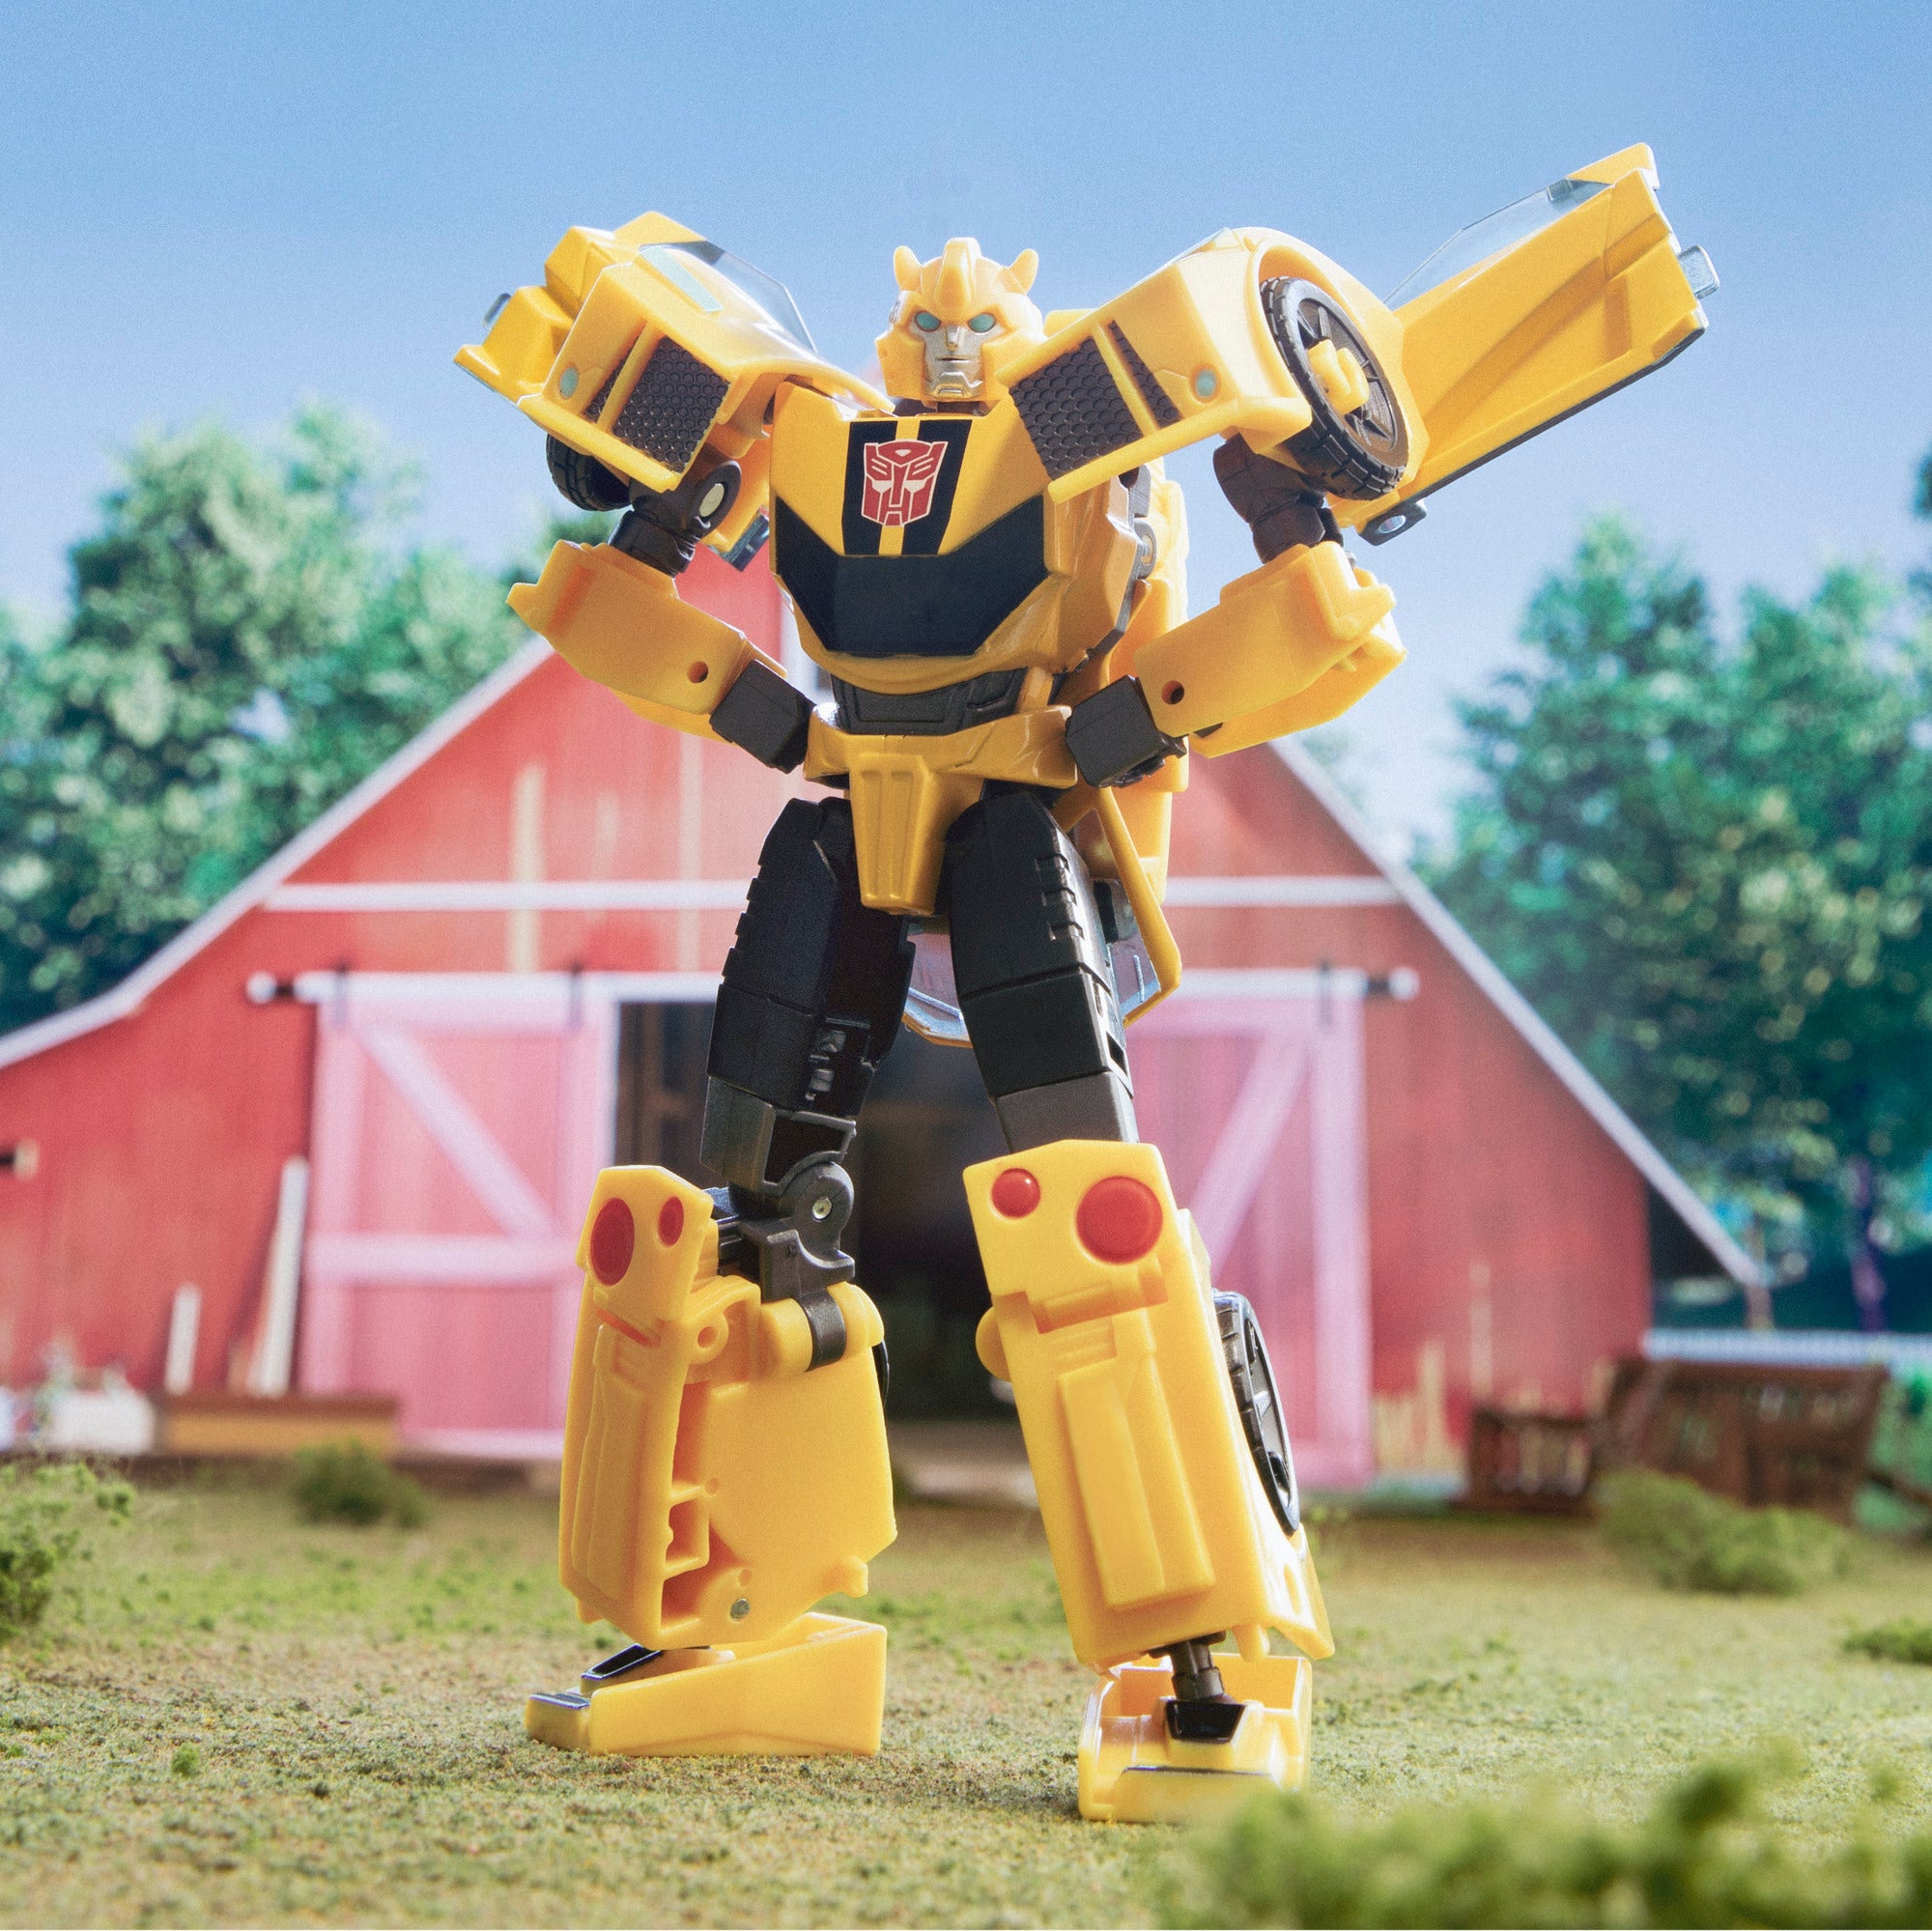 Transformers Prime Robots In Disguise 001 Bumblebee - Deluxe